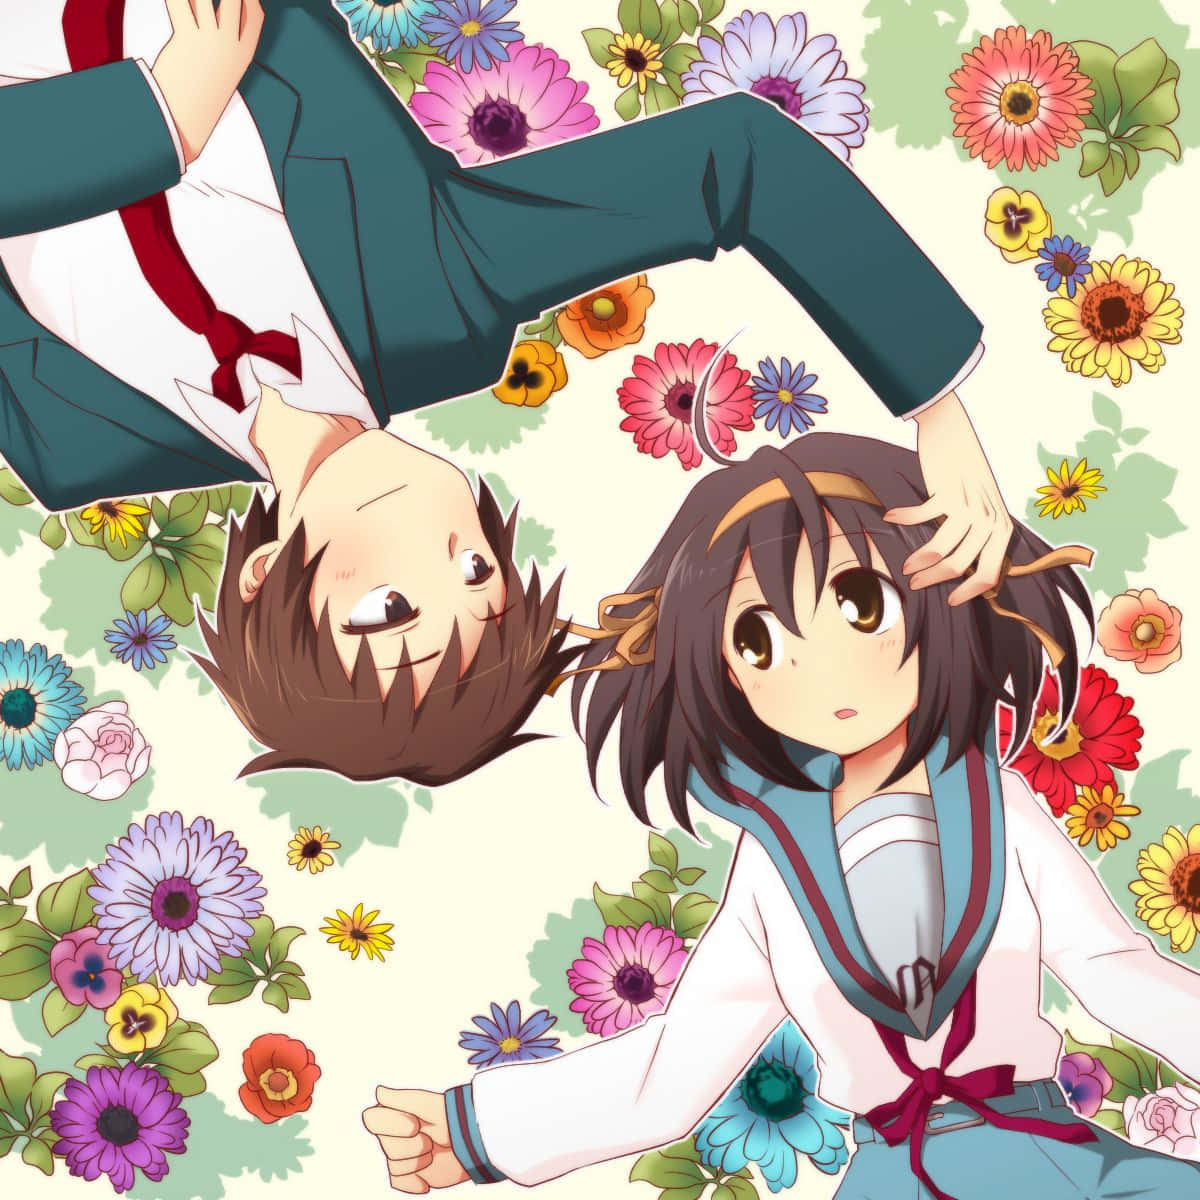 Kyon - The witty protagonist from The Melancholy of Haruhi Suzumiya Wallpaper